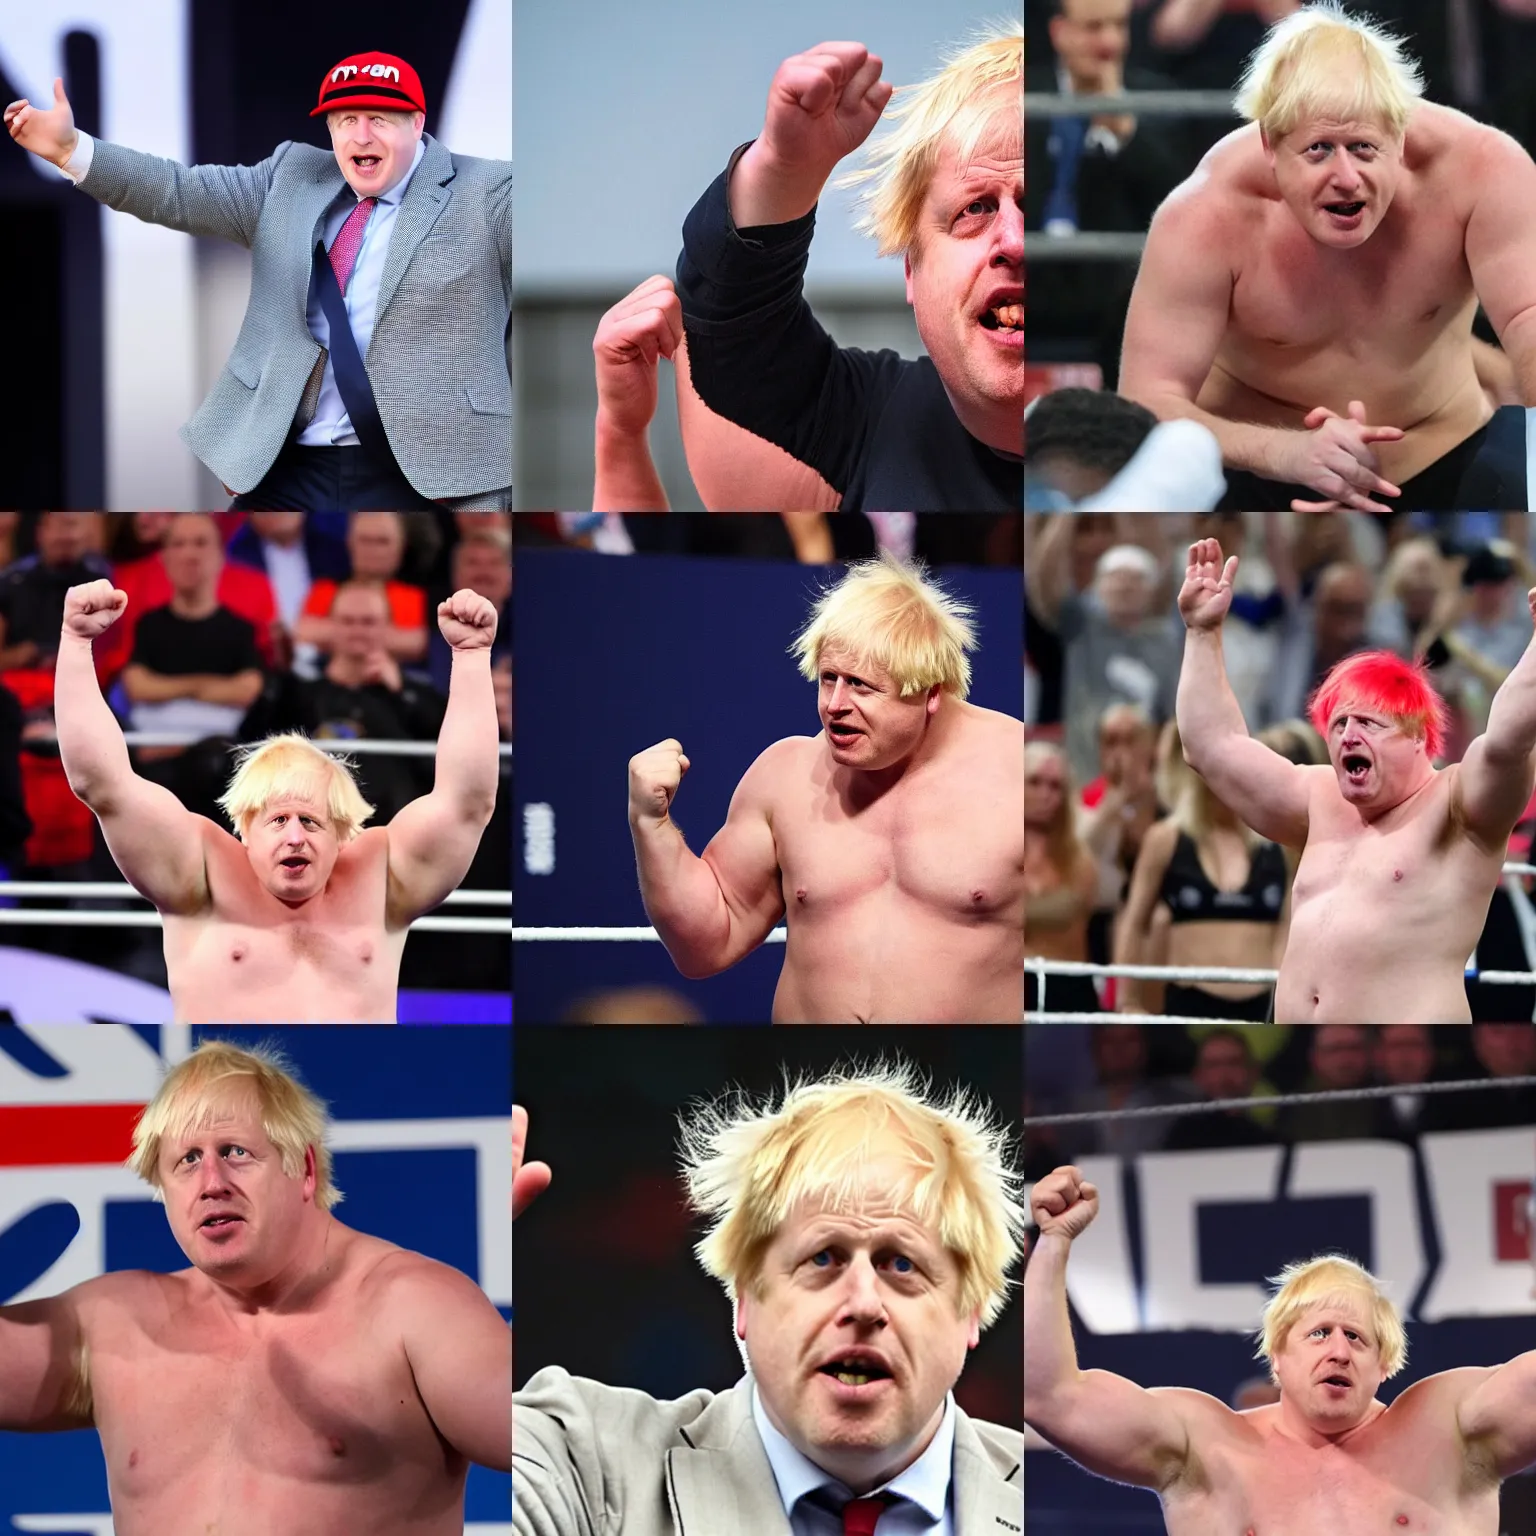 Prompt: boris johnson as an angry muscular wwe wrestler wearing a cap hat. he is waving his hand in front of his face